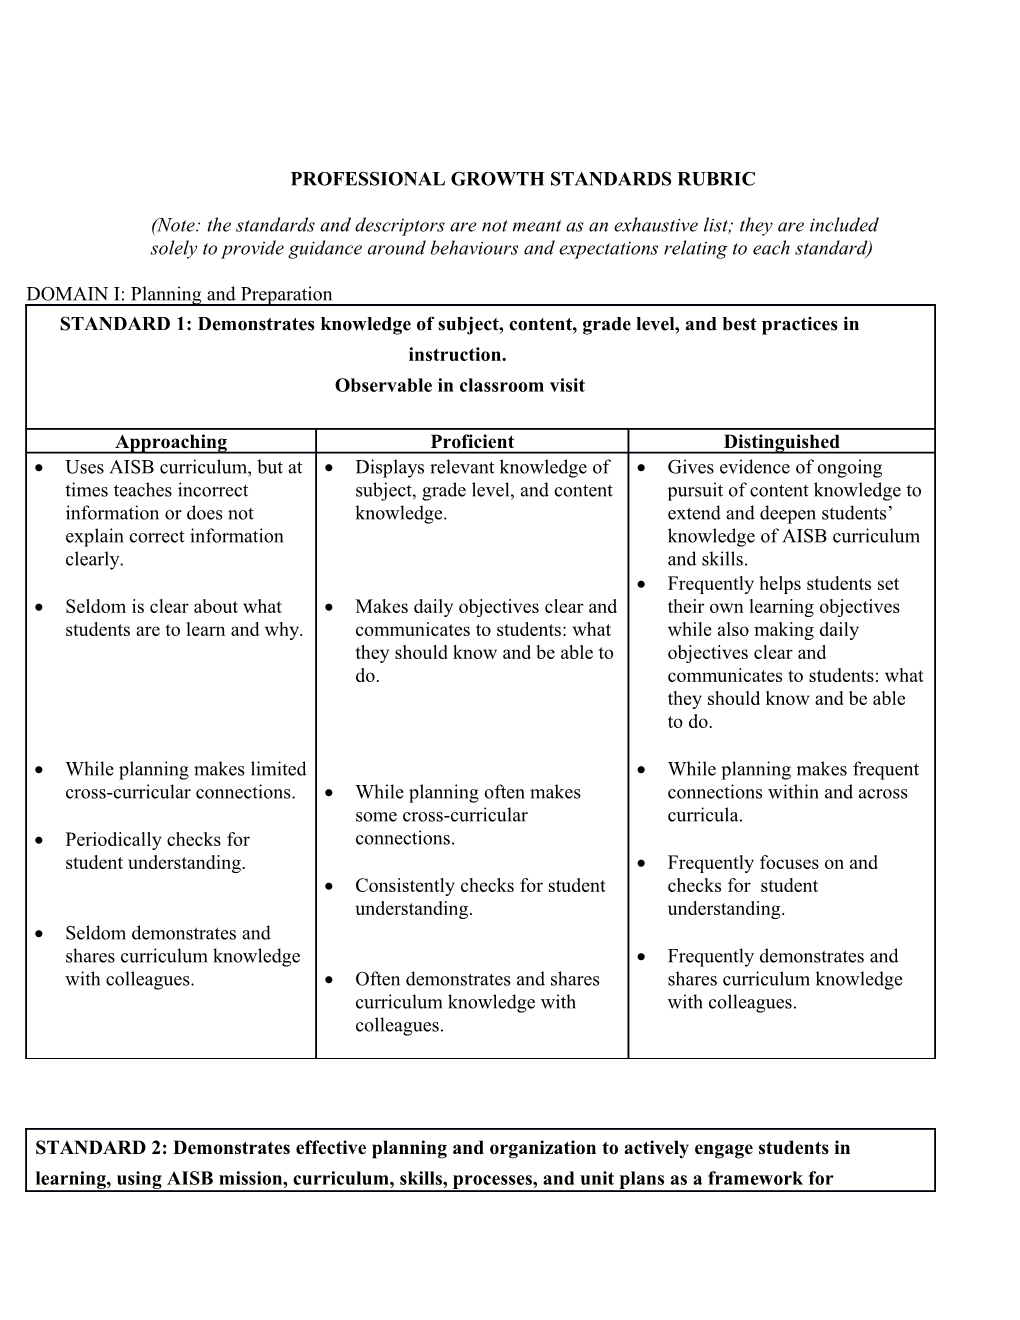 Professional Growth Standards Rubric